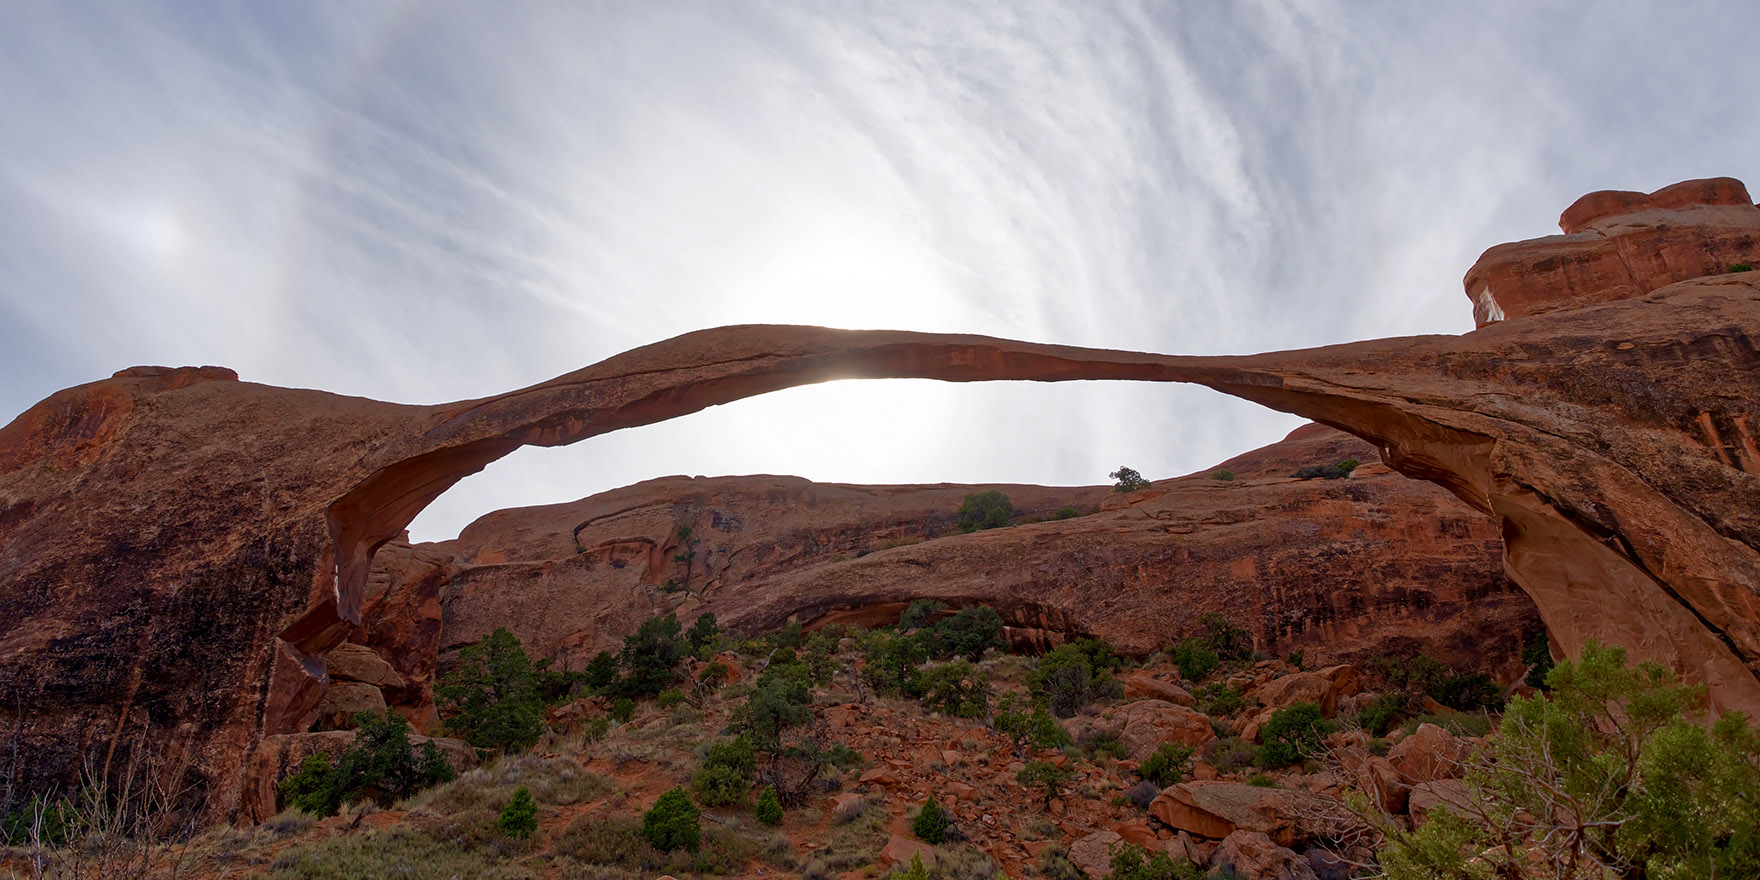 The frail Landscape Arch spans 290 feet (88.4 meters)